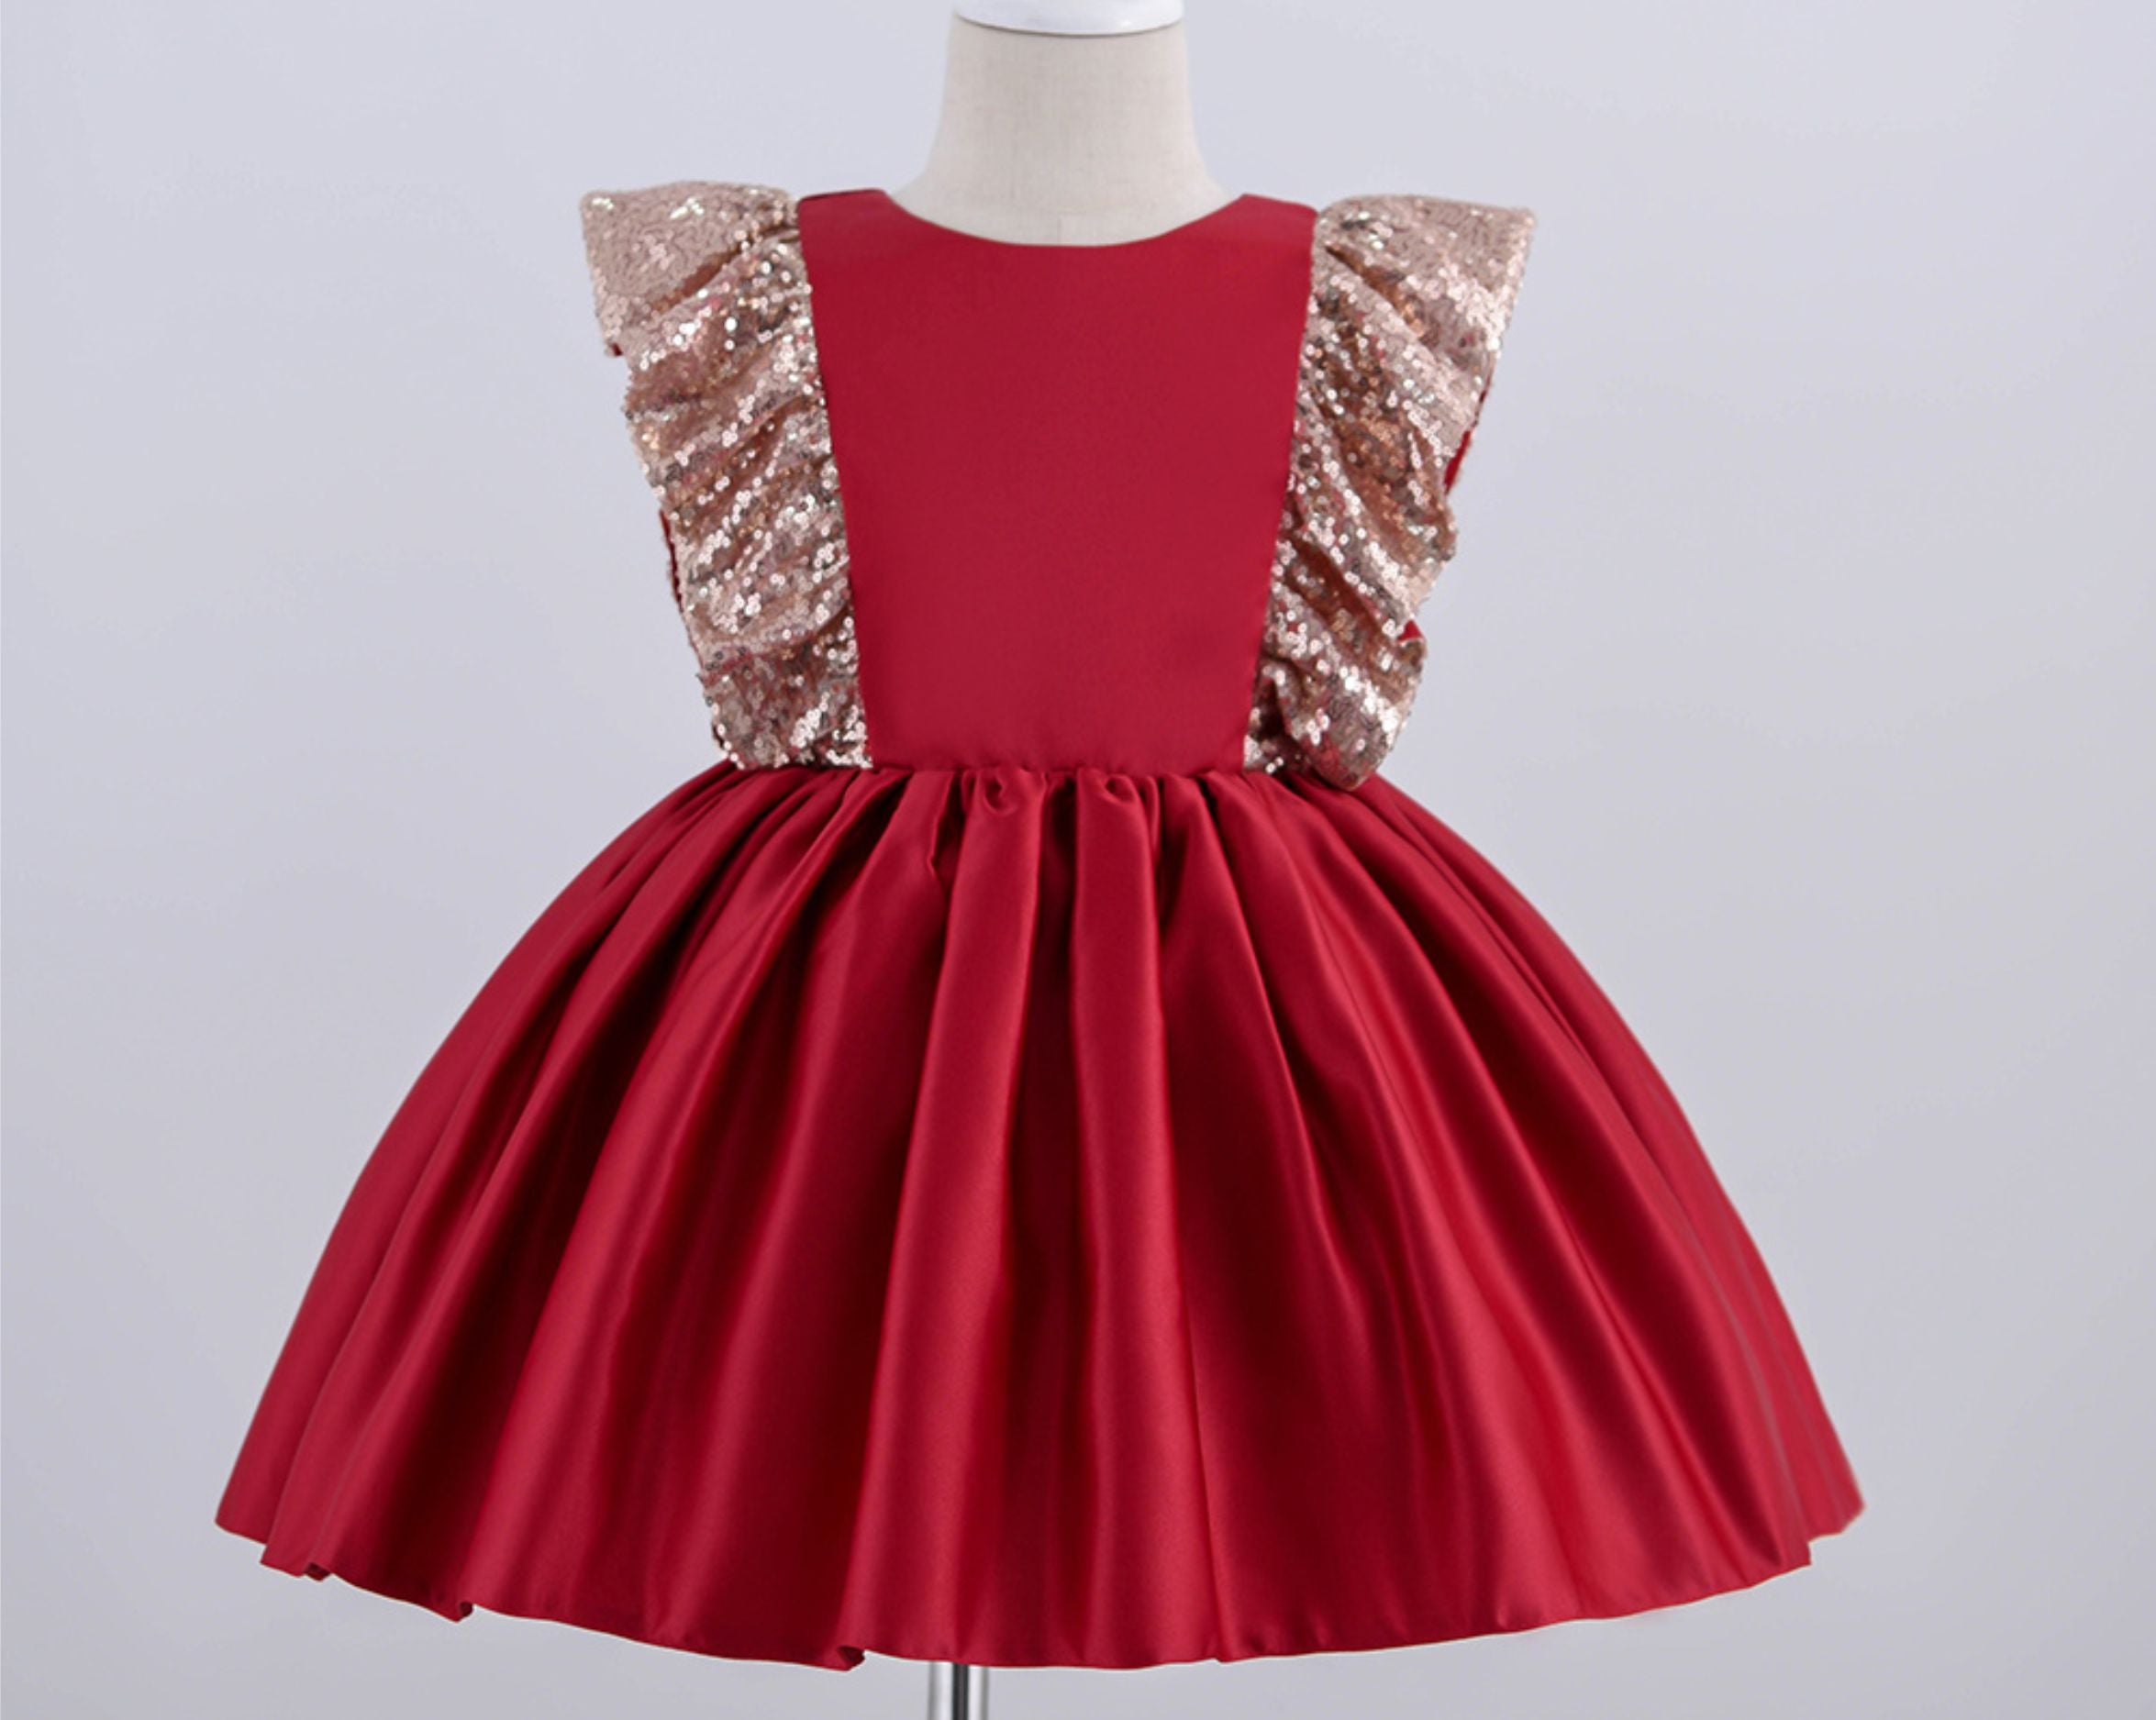 Red Cocktail Dresses for Women - Red Party Dresses | Tobi